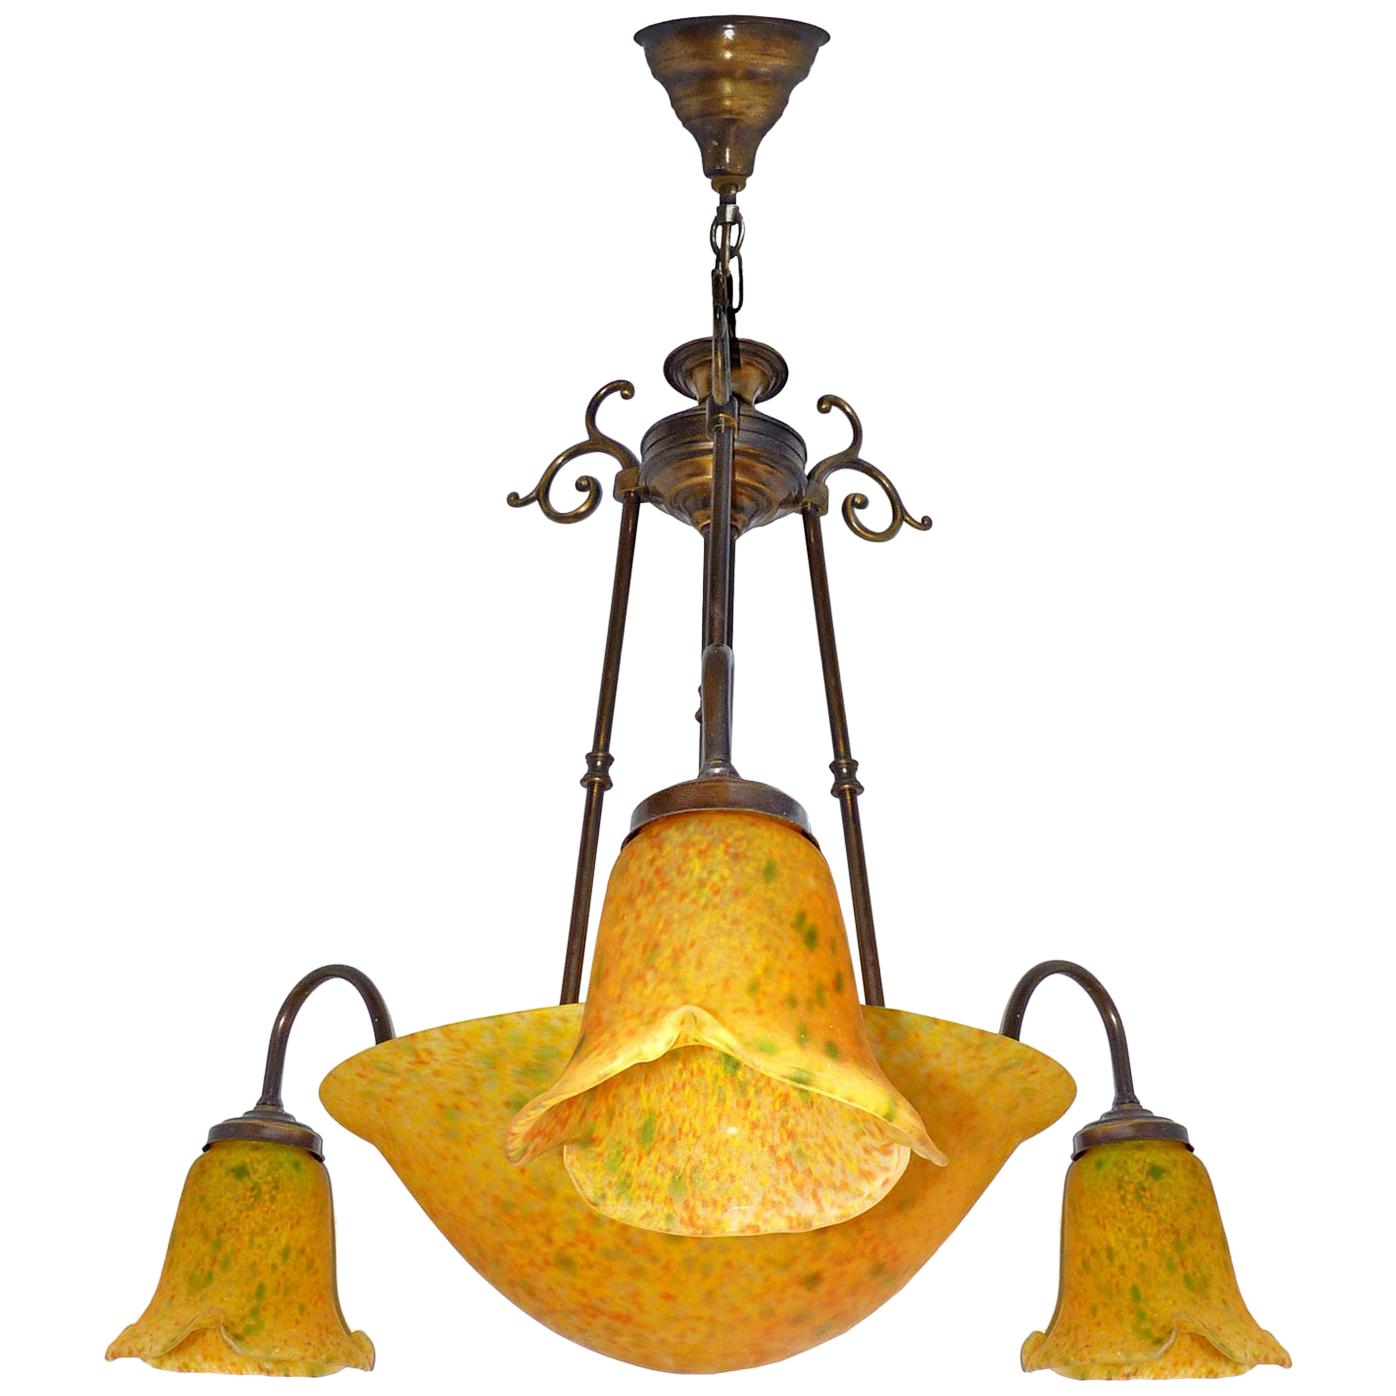 French Art Deco and Art Nouveau Polychrome Amber Glass 4-Light Chandelier